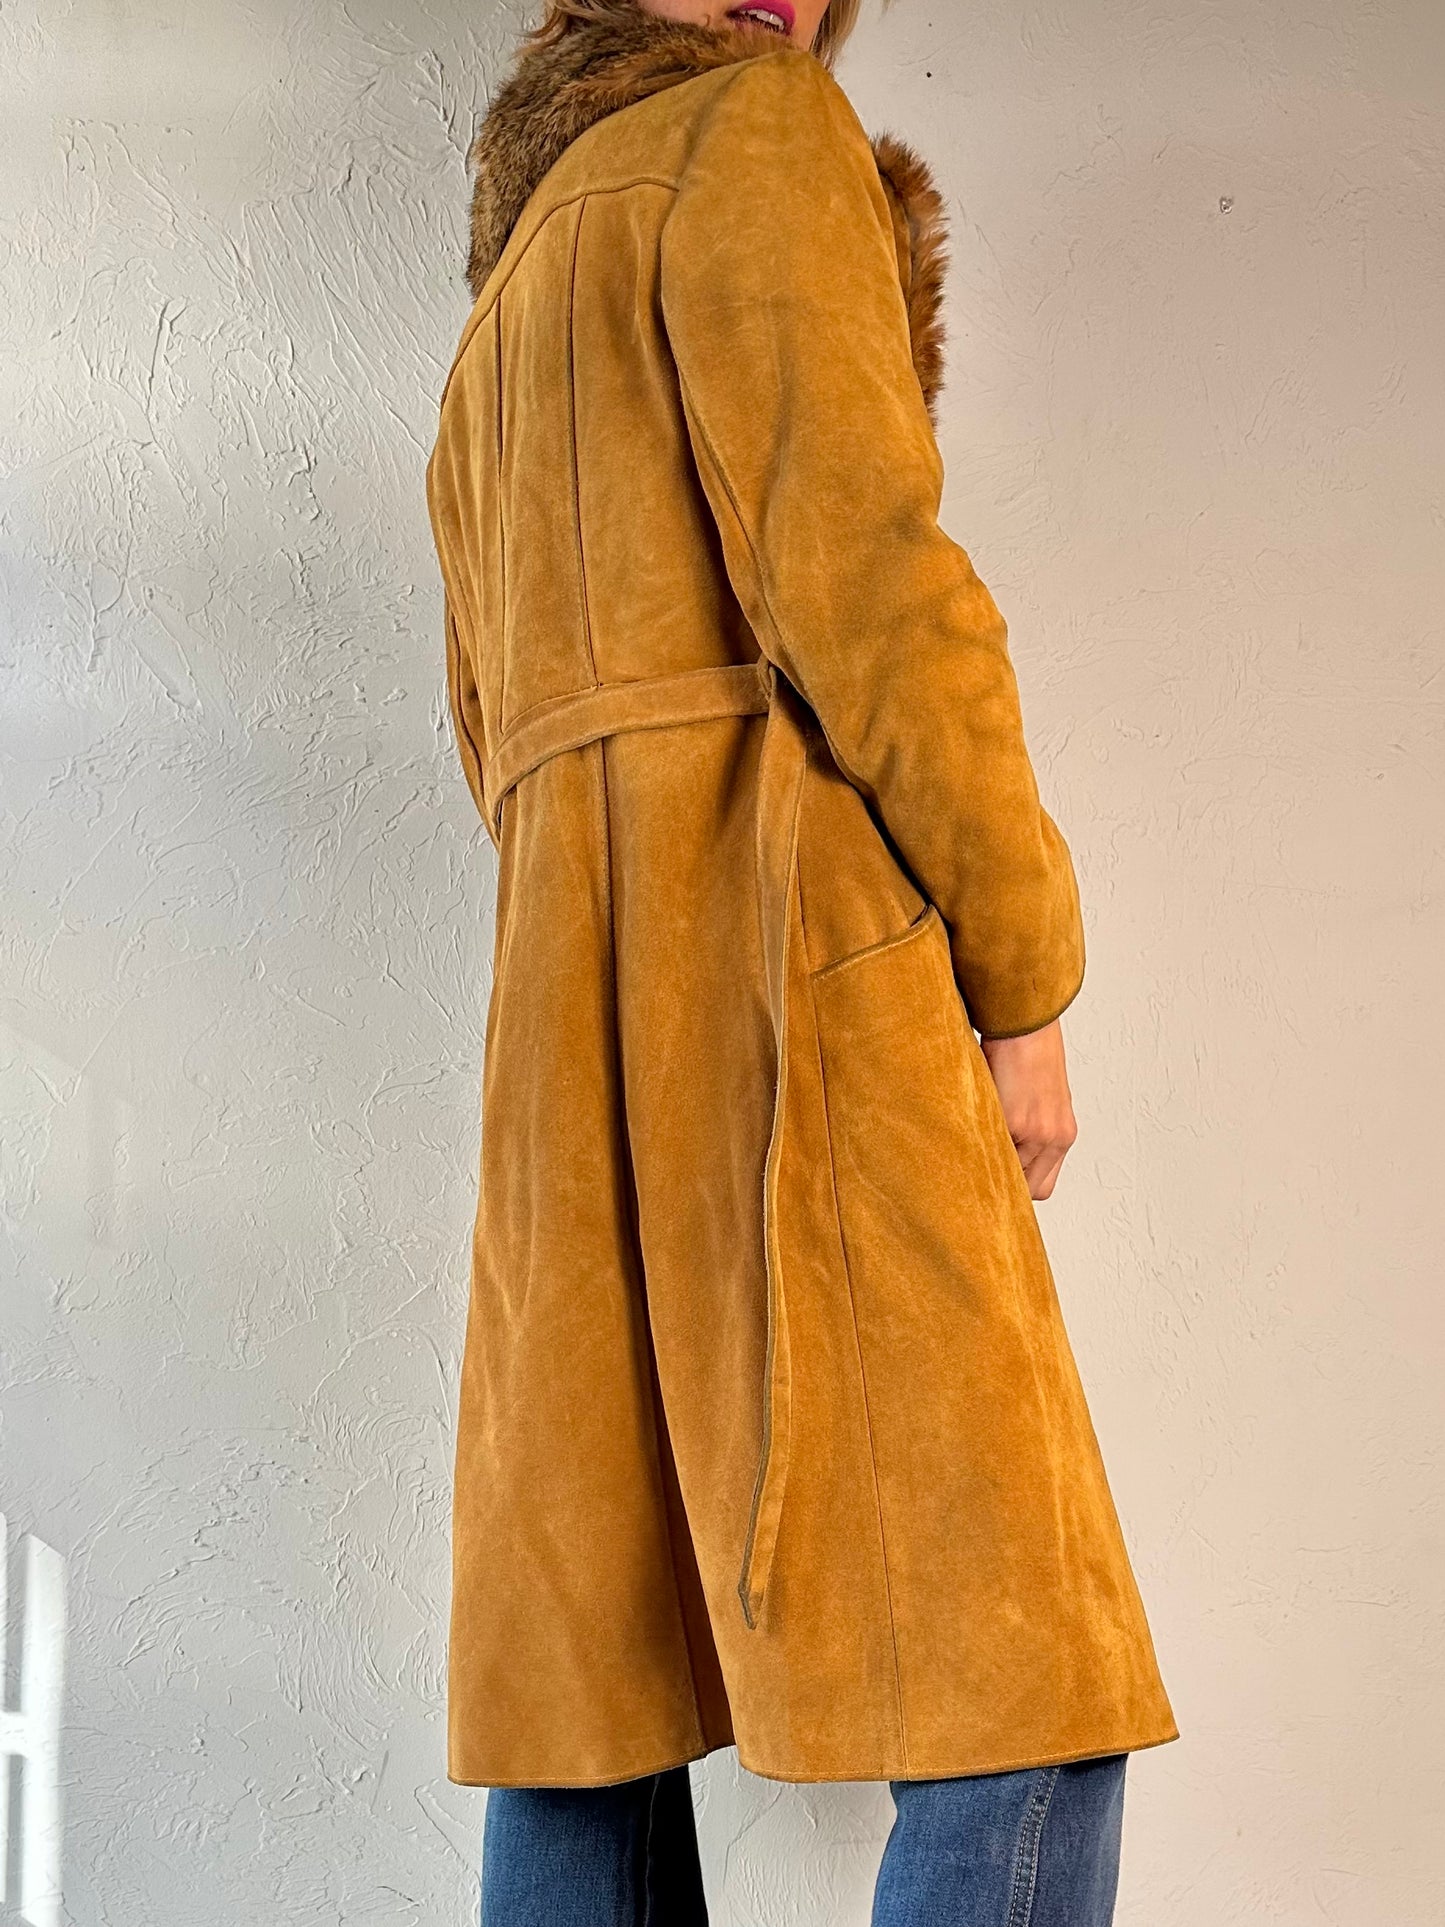 70s 'Fairweather' Suede Leather Penny Lane Coat / Small